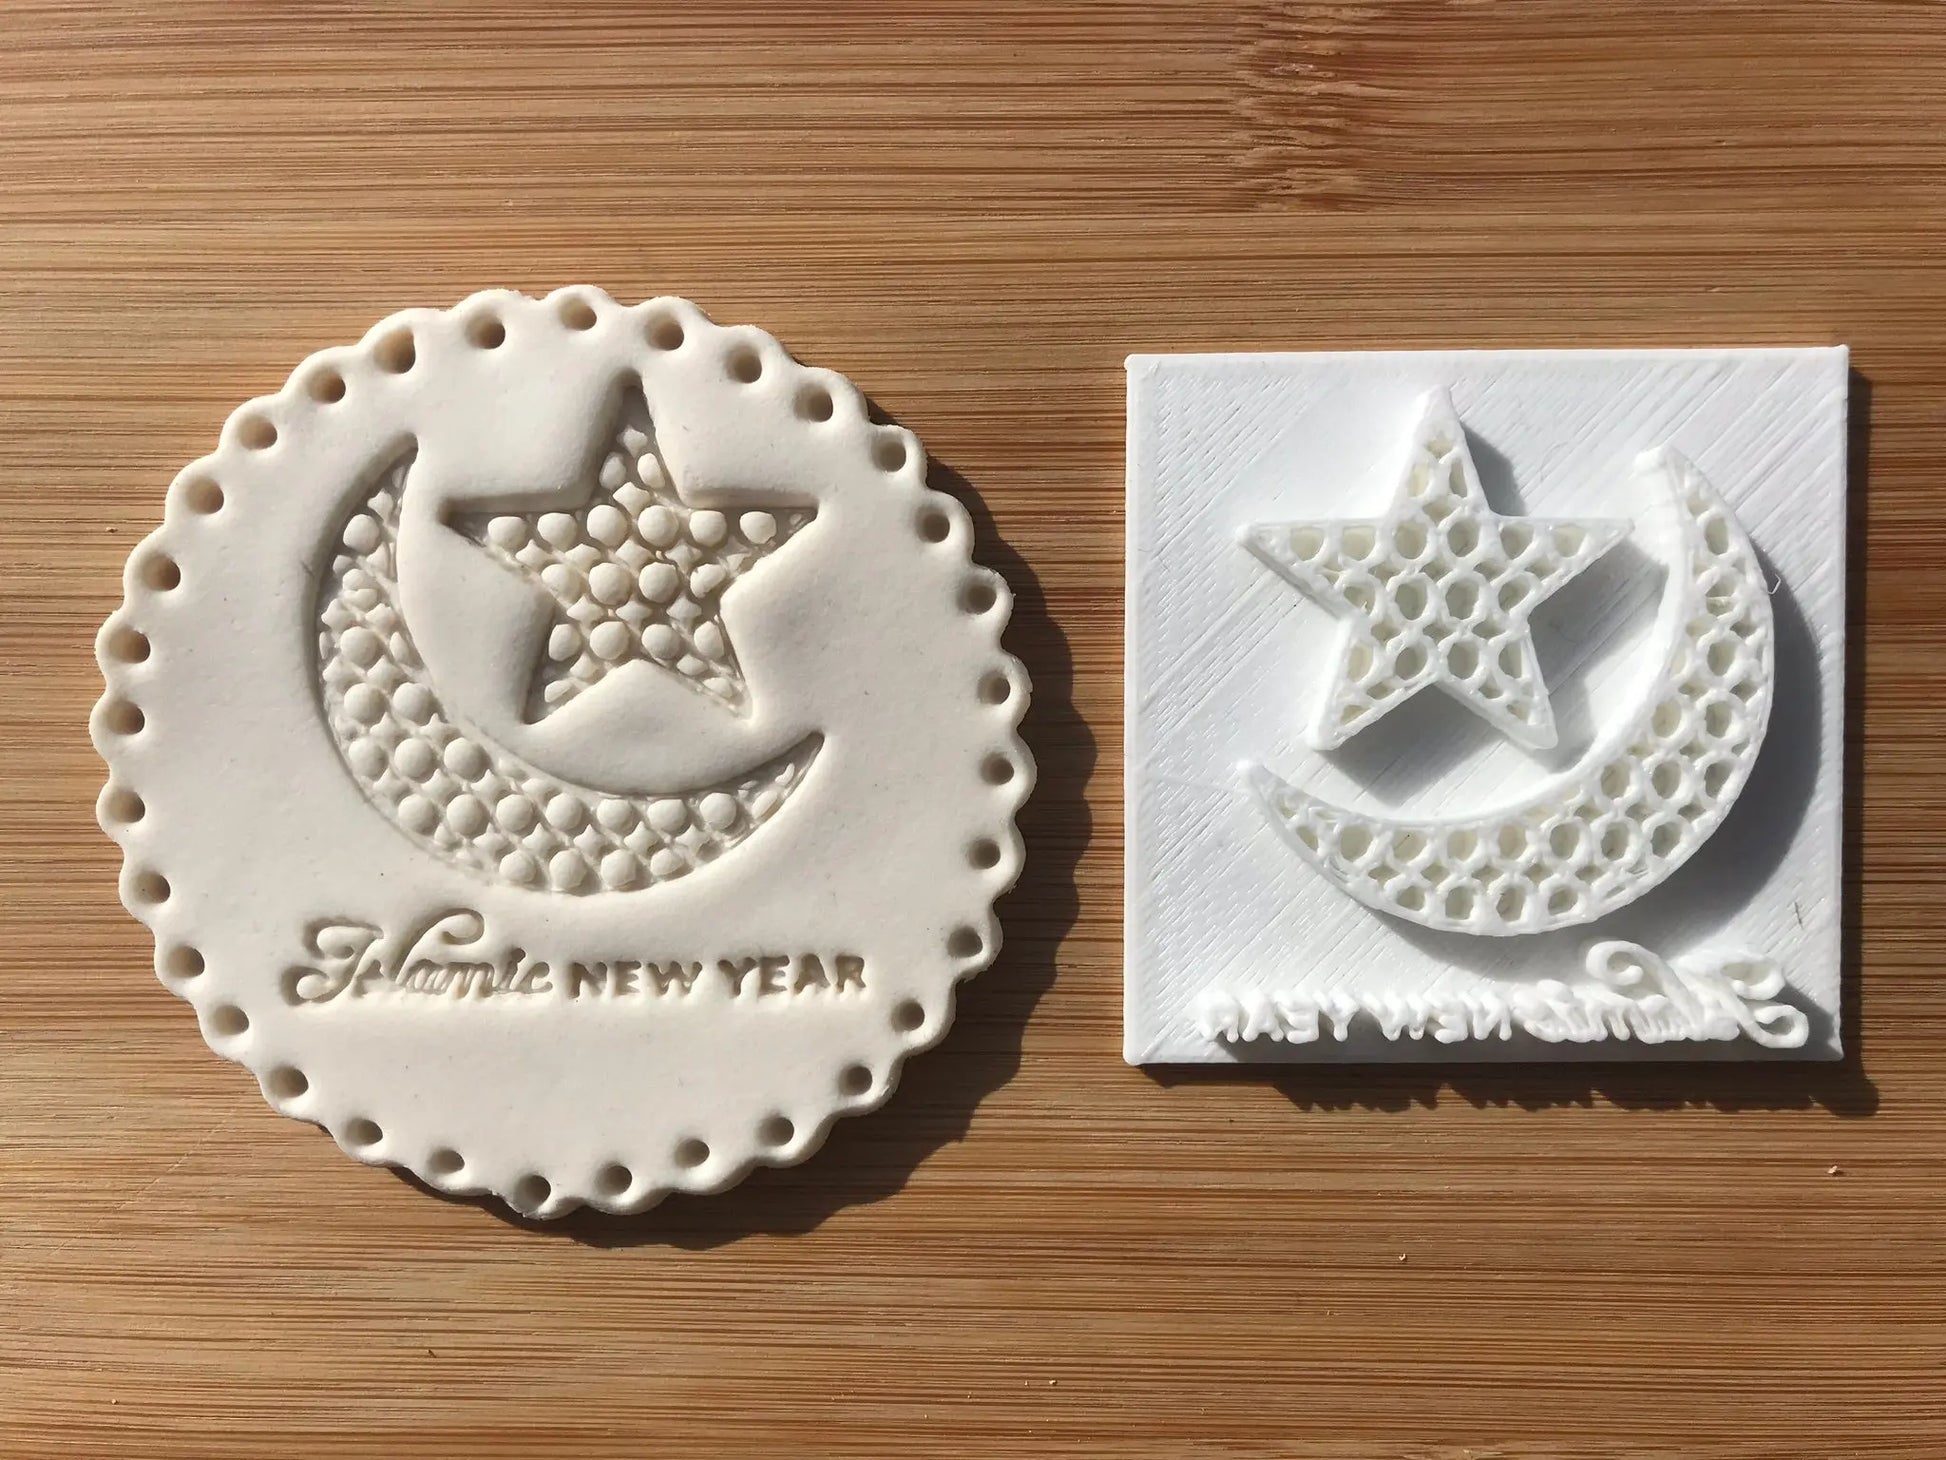 Muslim Islamic Embossing for cupcake and cake - stamps sugar paste Design 11 MEG cookie cutters